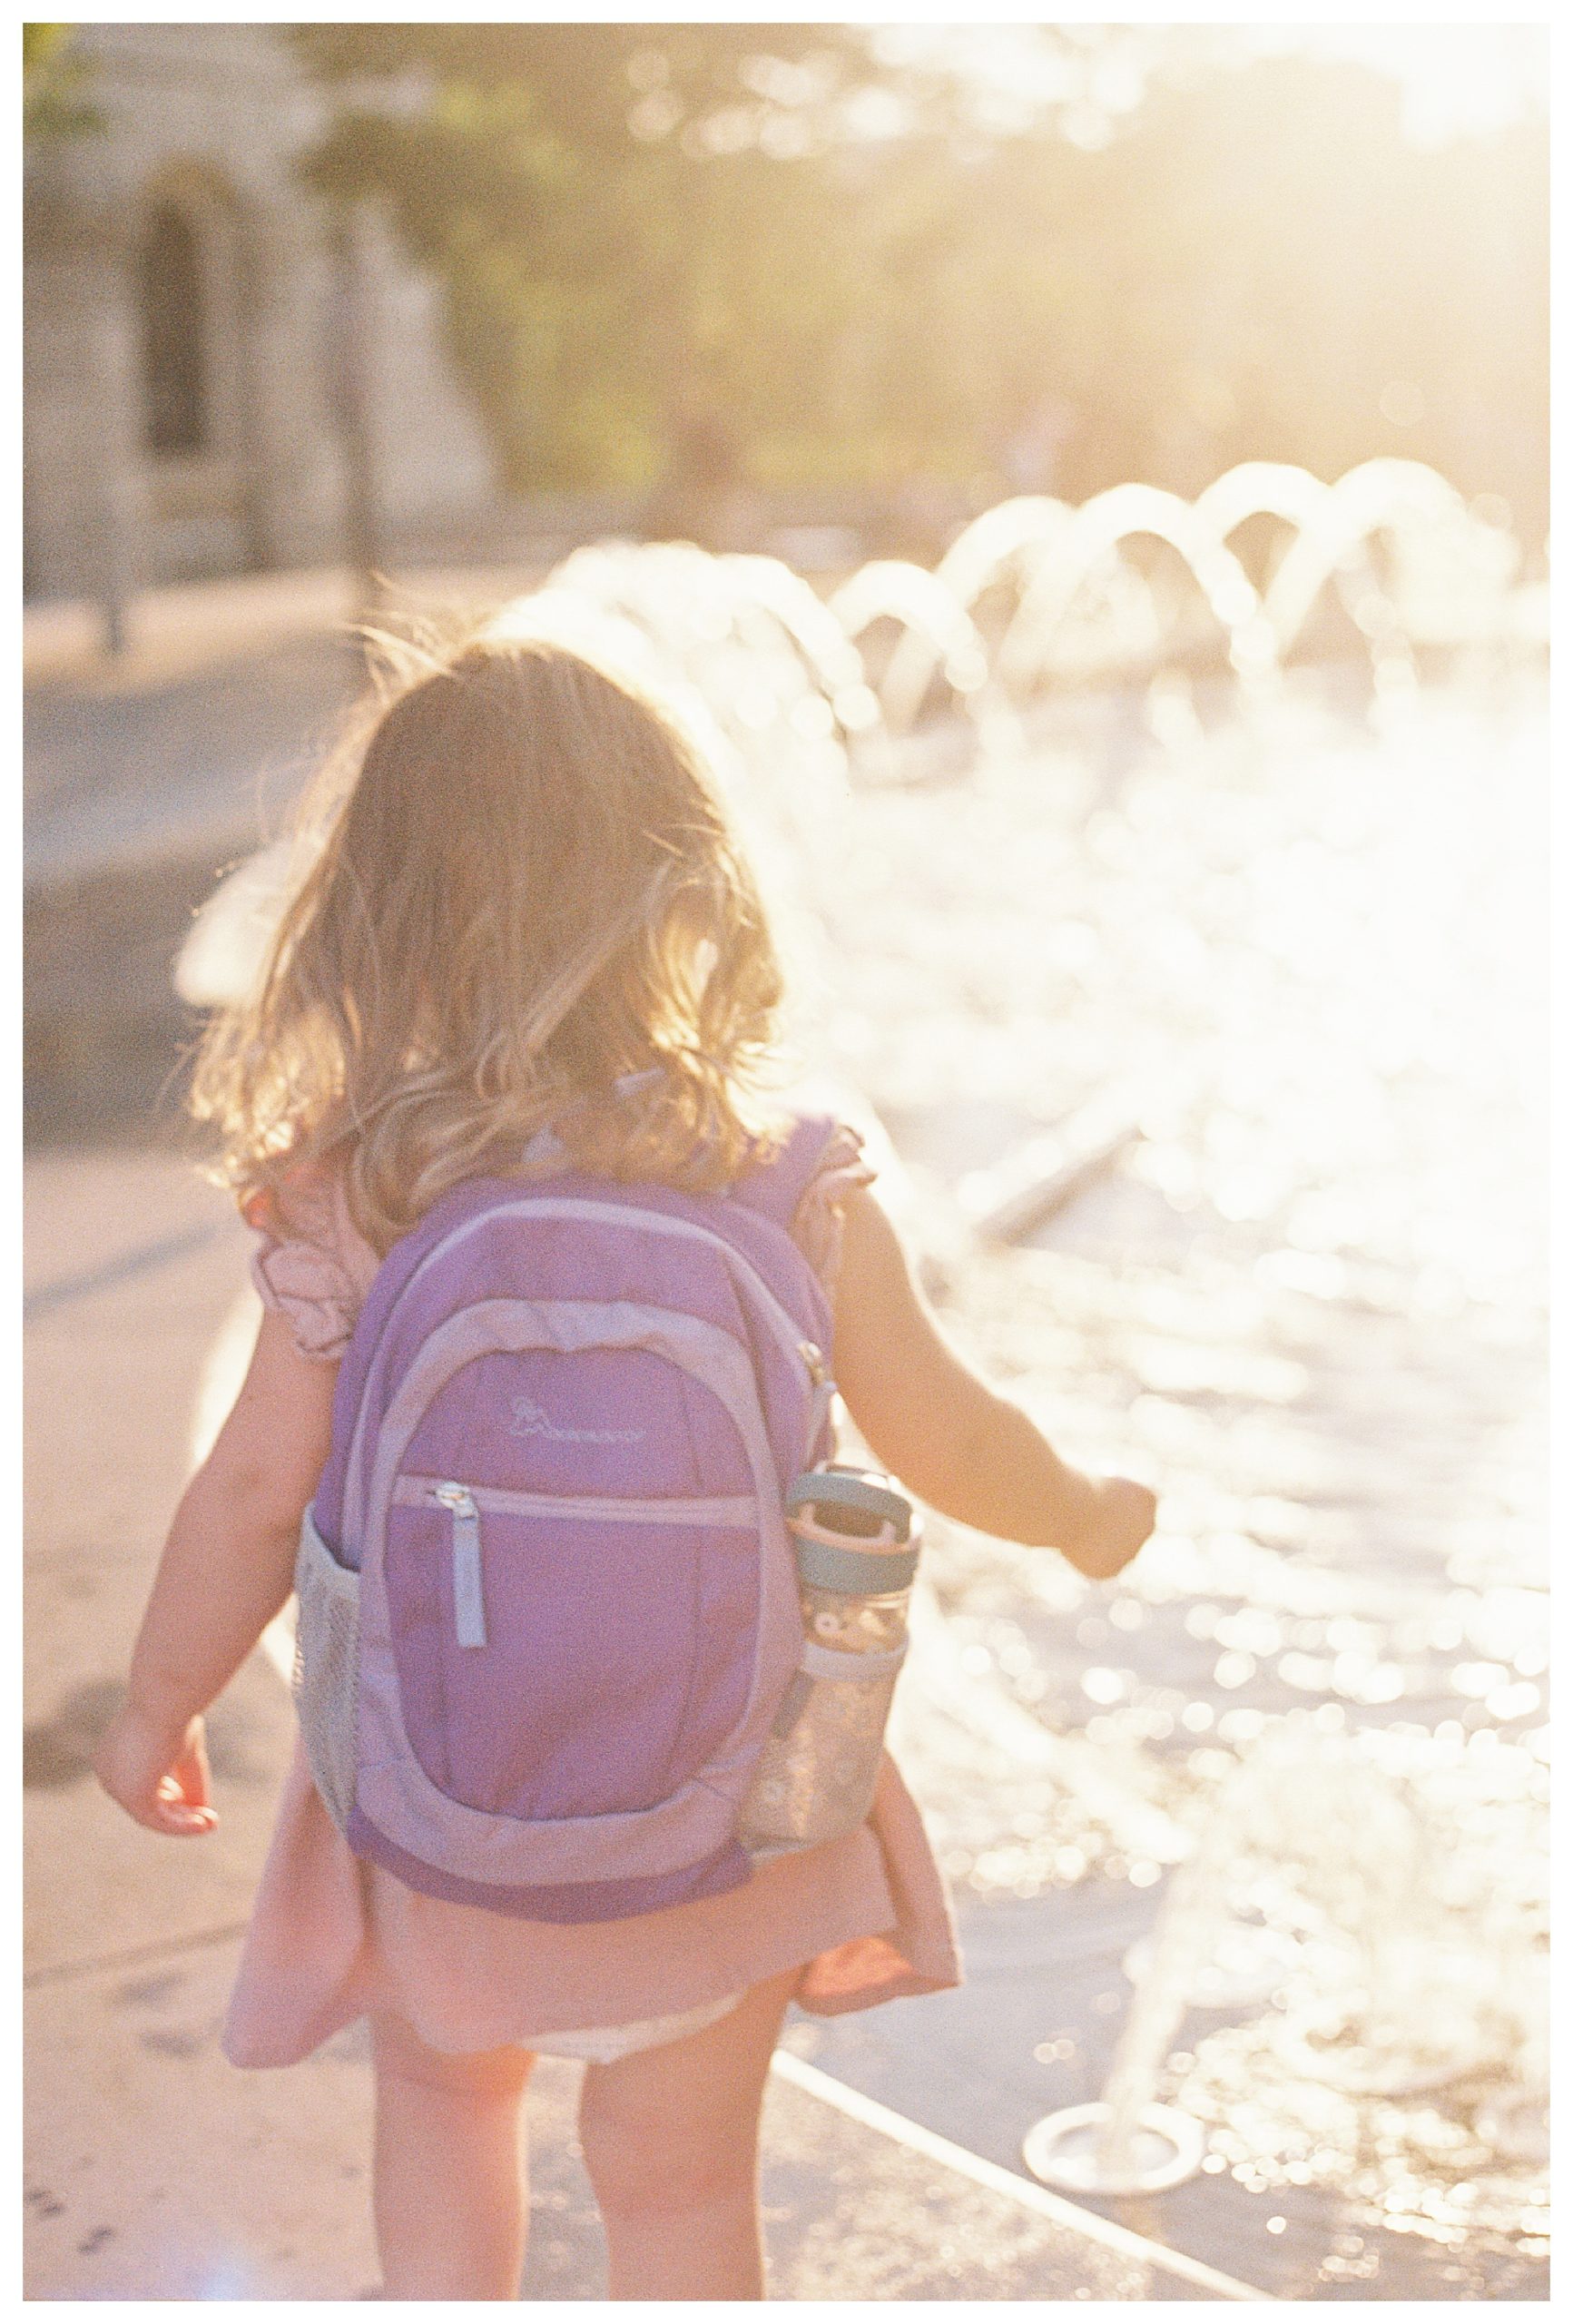 Little girl walks along fountain at sunset with purple backpack.